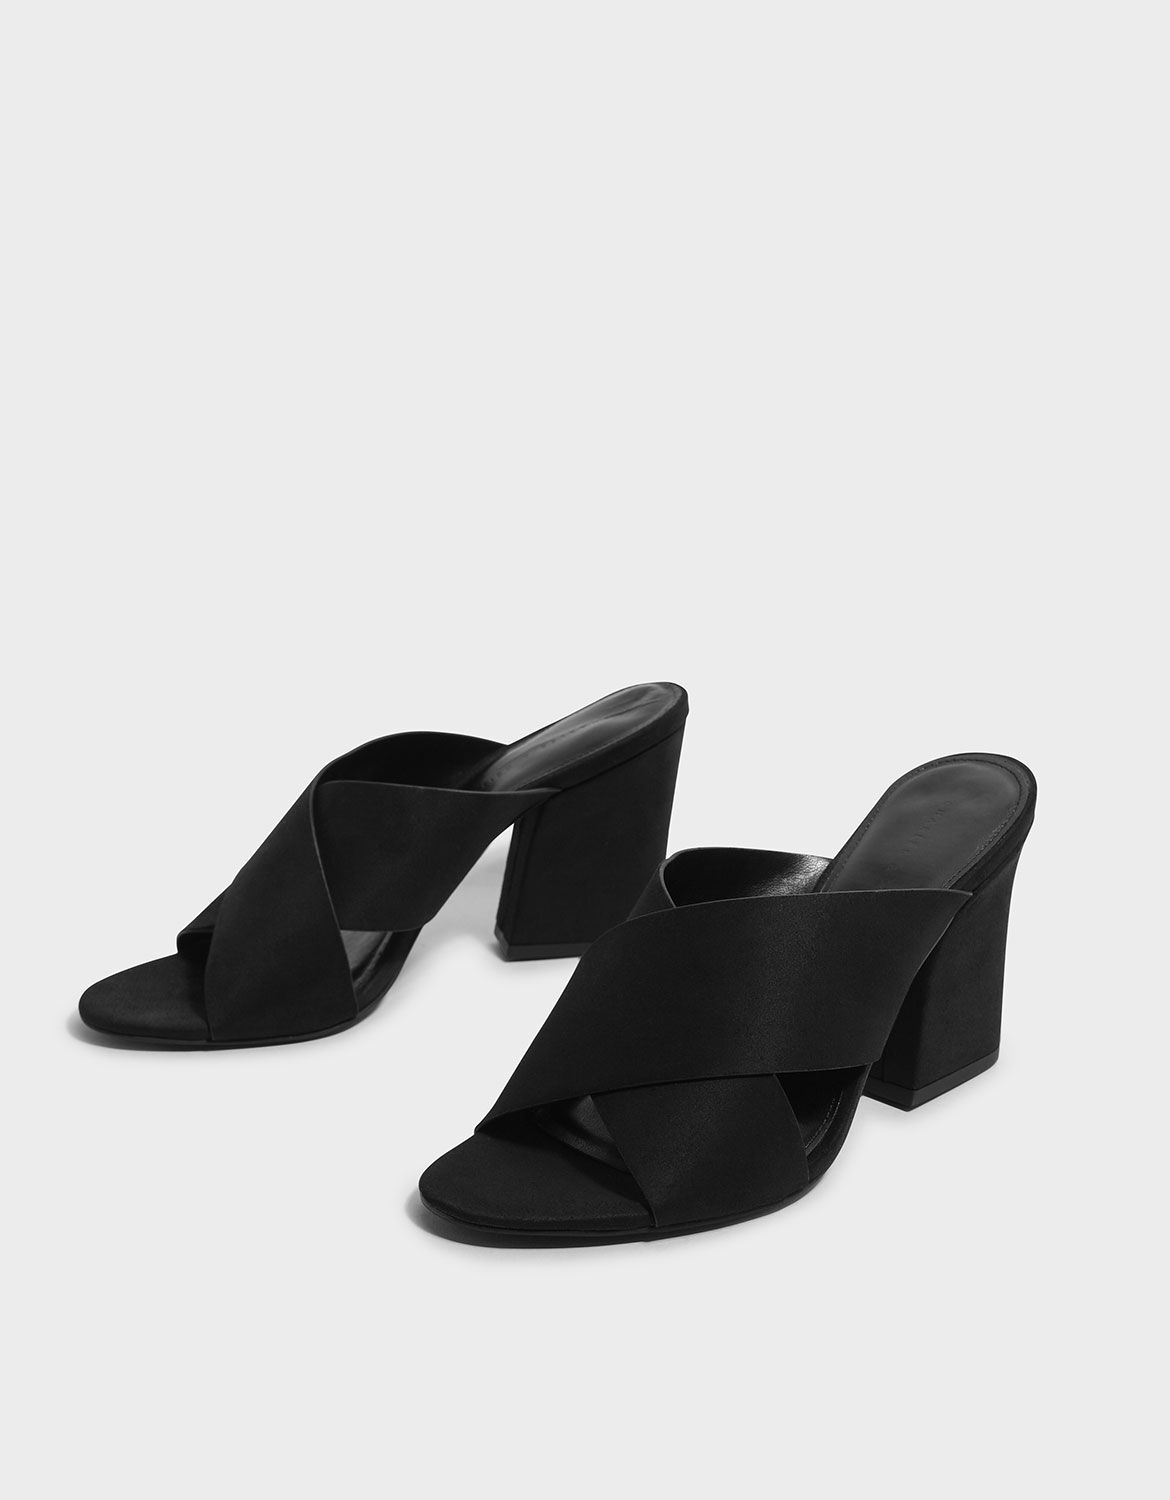 Women's Online Shoes, Bags & Accessories Sale | CHARLES & KEITH LK